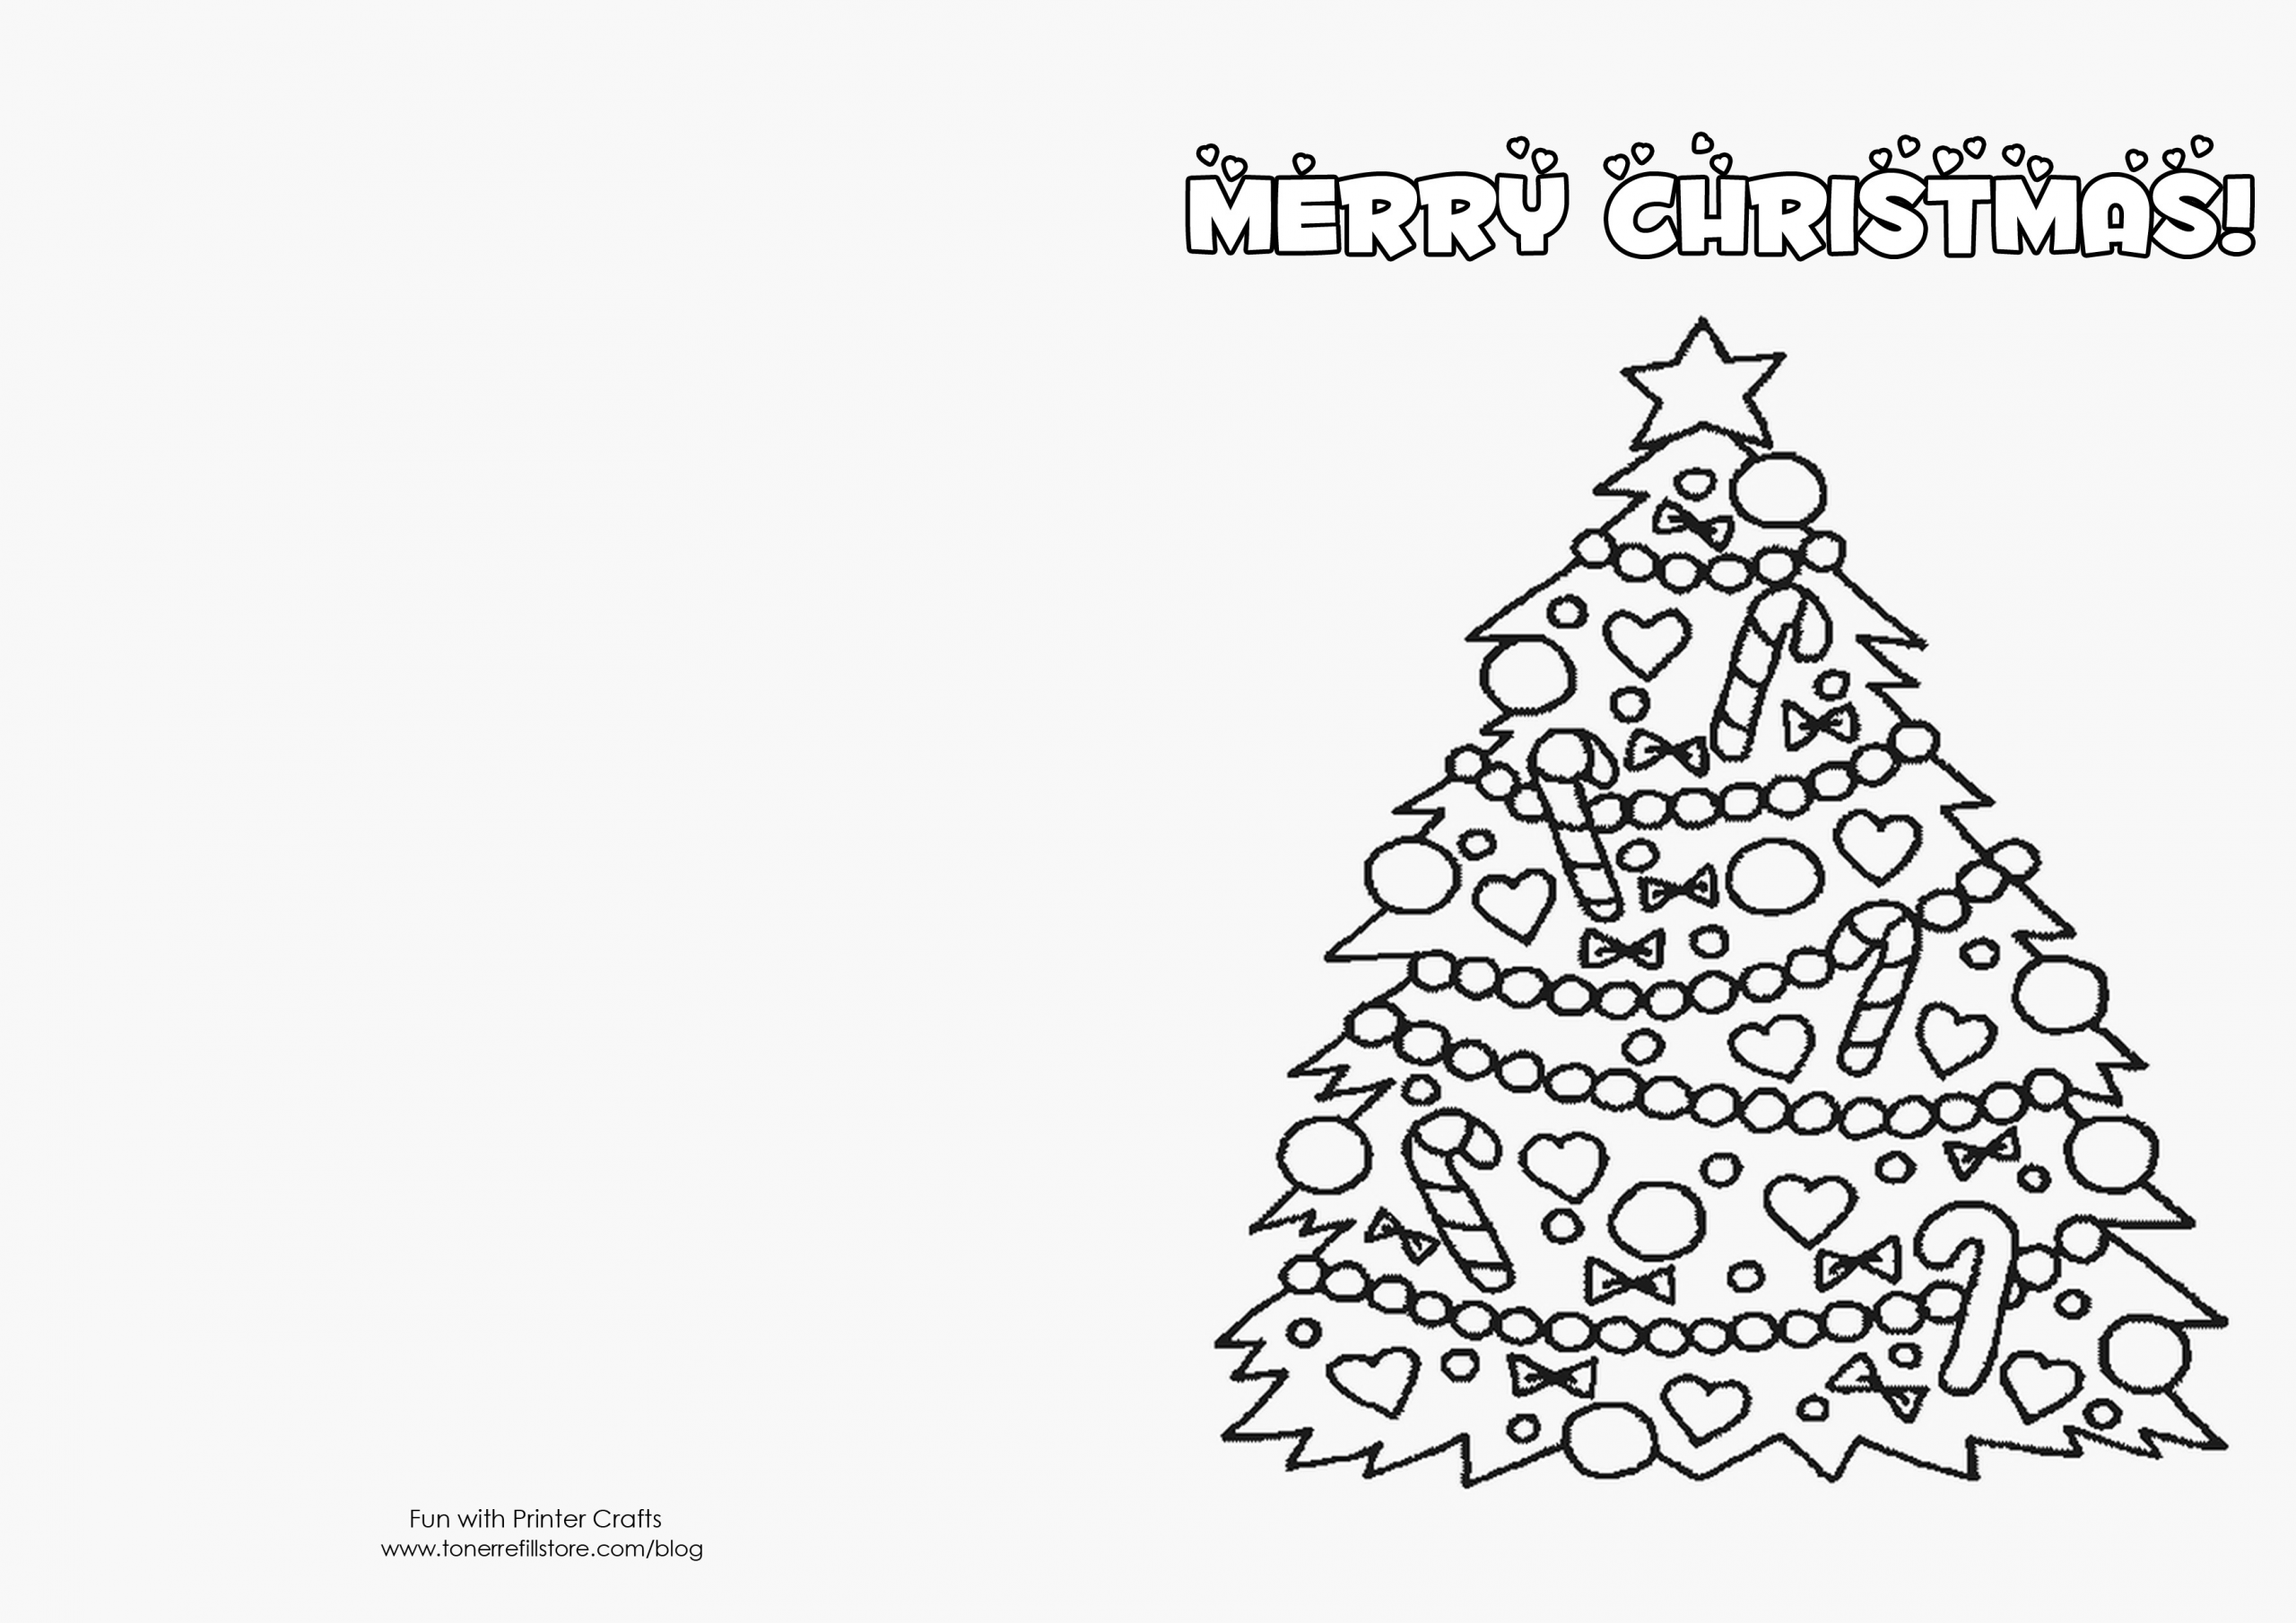 Easy Crafts And Free Printables For Xmas Cards For Kids To Make
 How To Make Printable Christmas Cards For Kids To Color